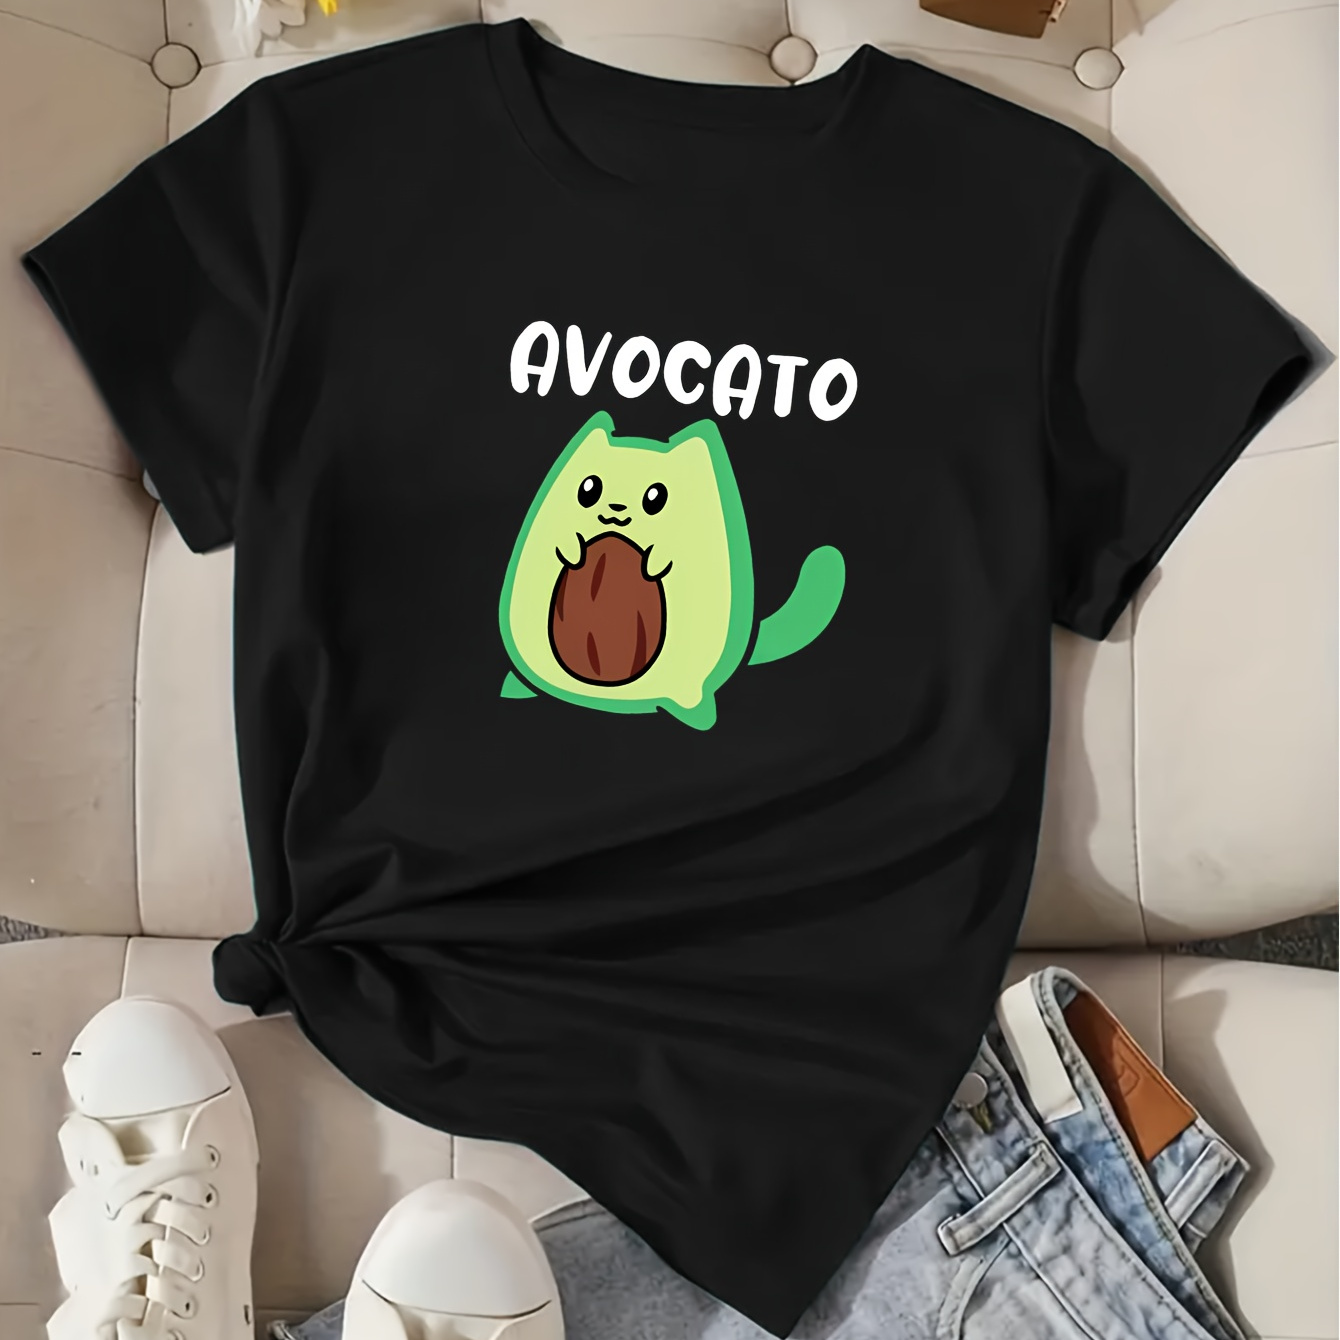 

Avocado Cartoon Graphic Sports Tee, Casual Crew Neck Workout Fitness Short Sleeves Tops, Women's Activewear